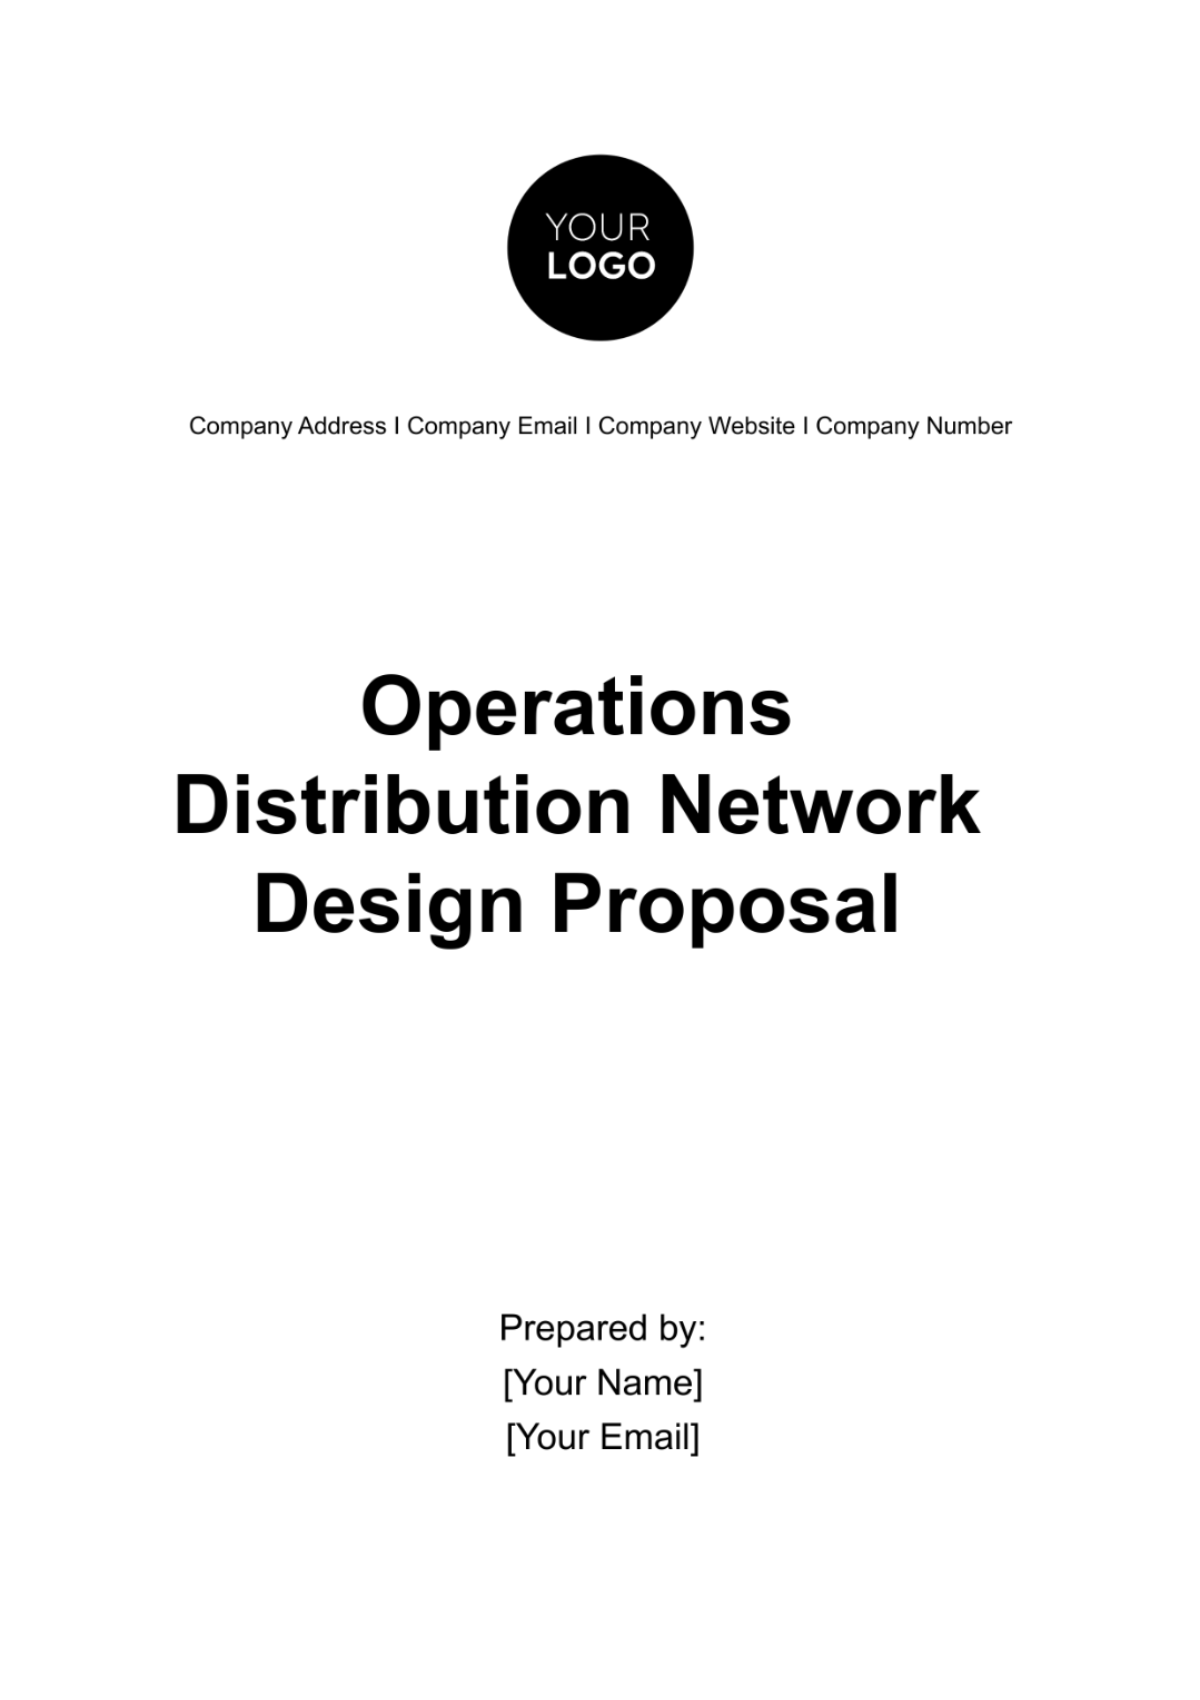 Operations Distribution Network Design Proposal Template